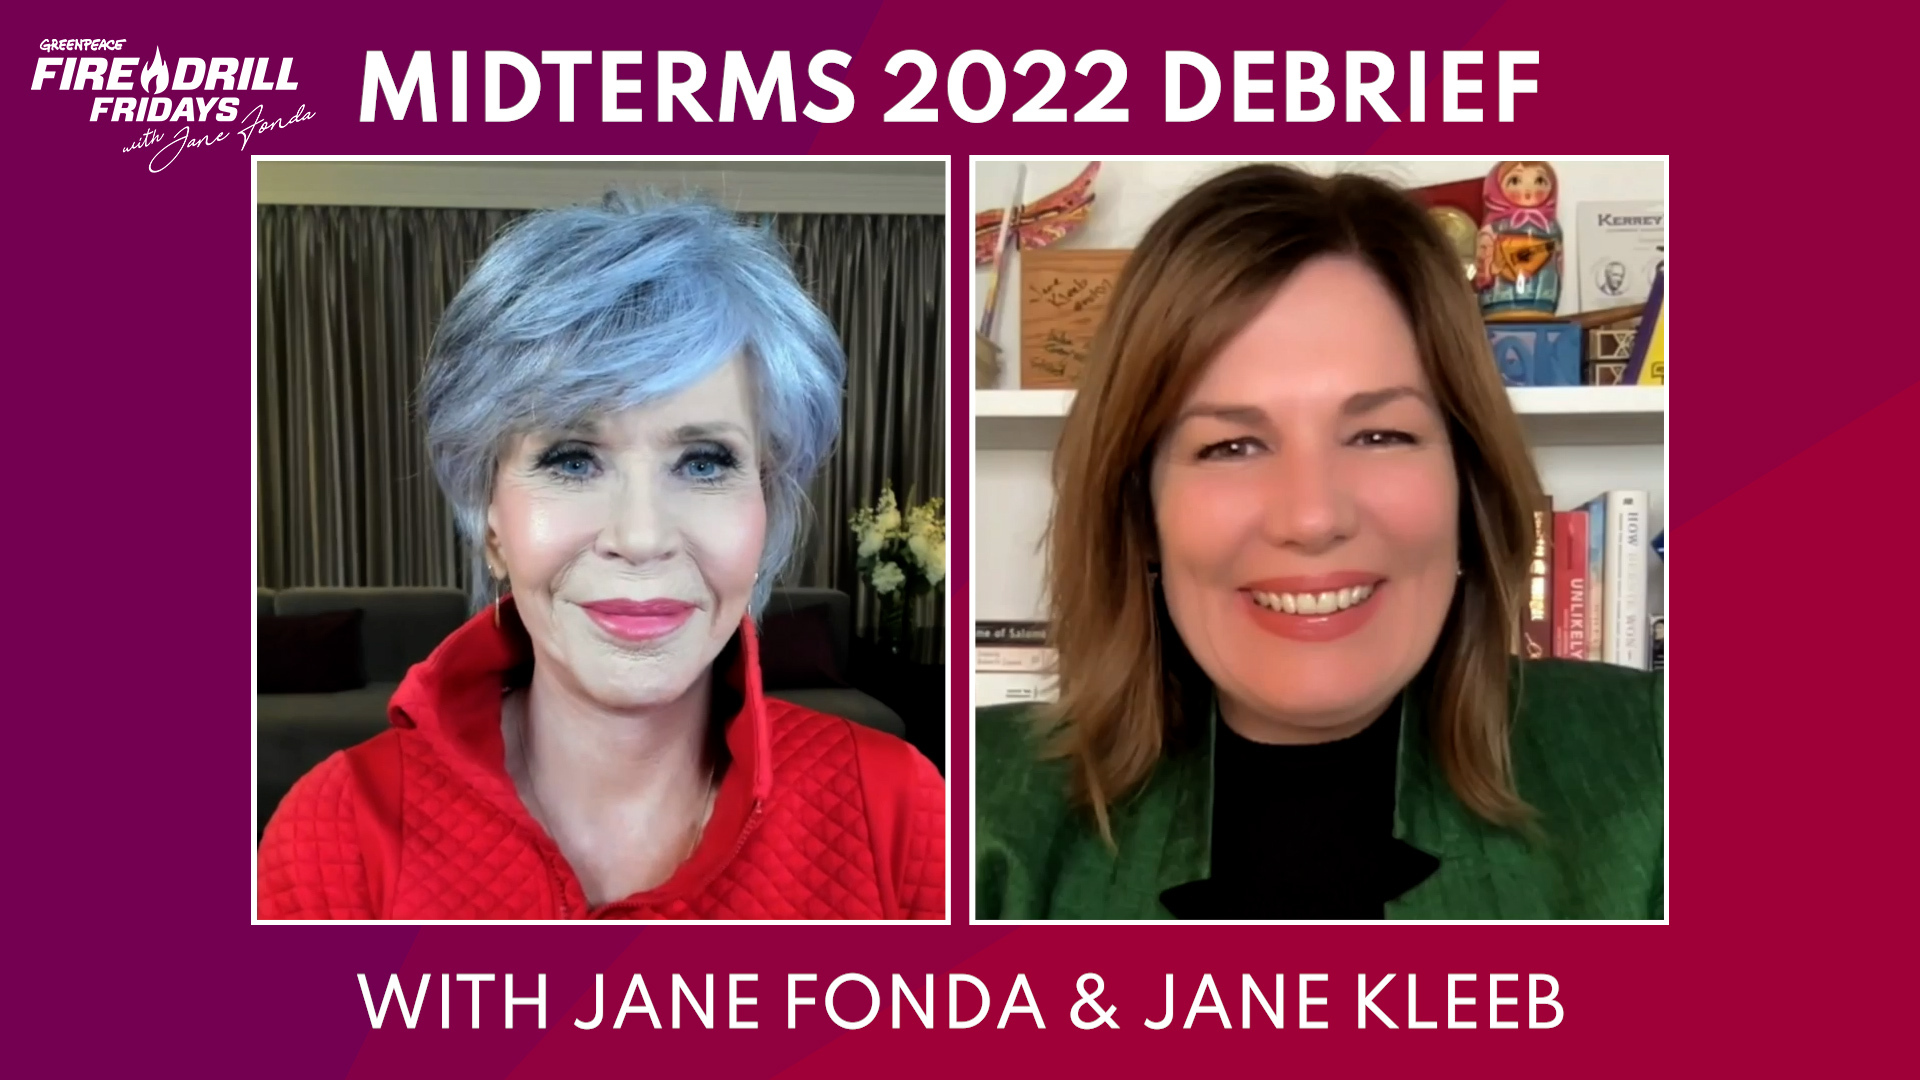 Watch Jane Fonda and Jane Kleeb Discuss the Midterm Elections and What Comes Next